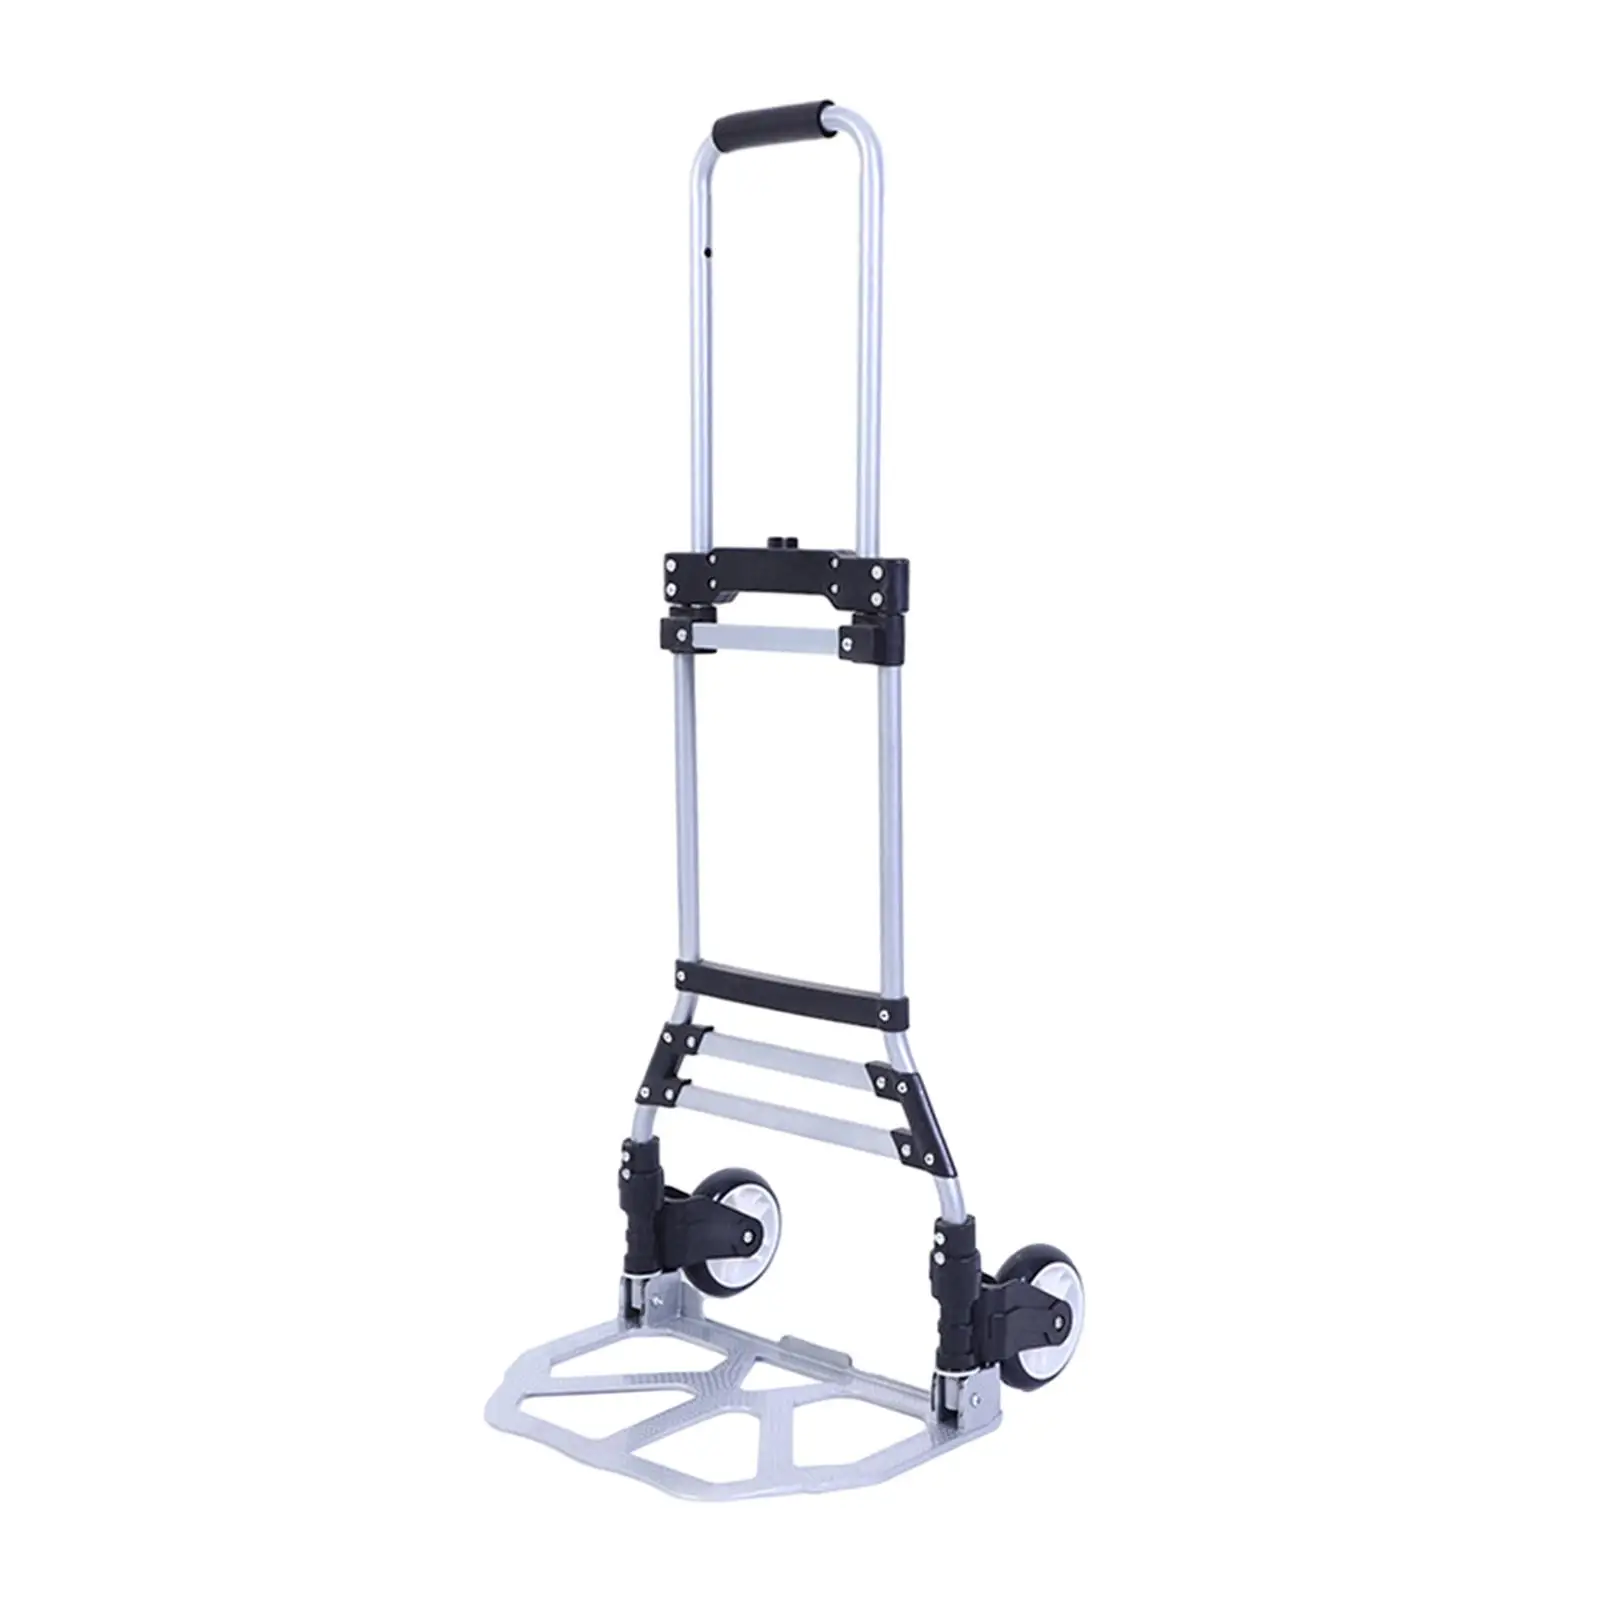 Folding Hand Truck, Folding Luggage Trolley, Foldable Roller Shopping Trolley, for Household